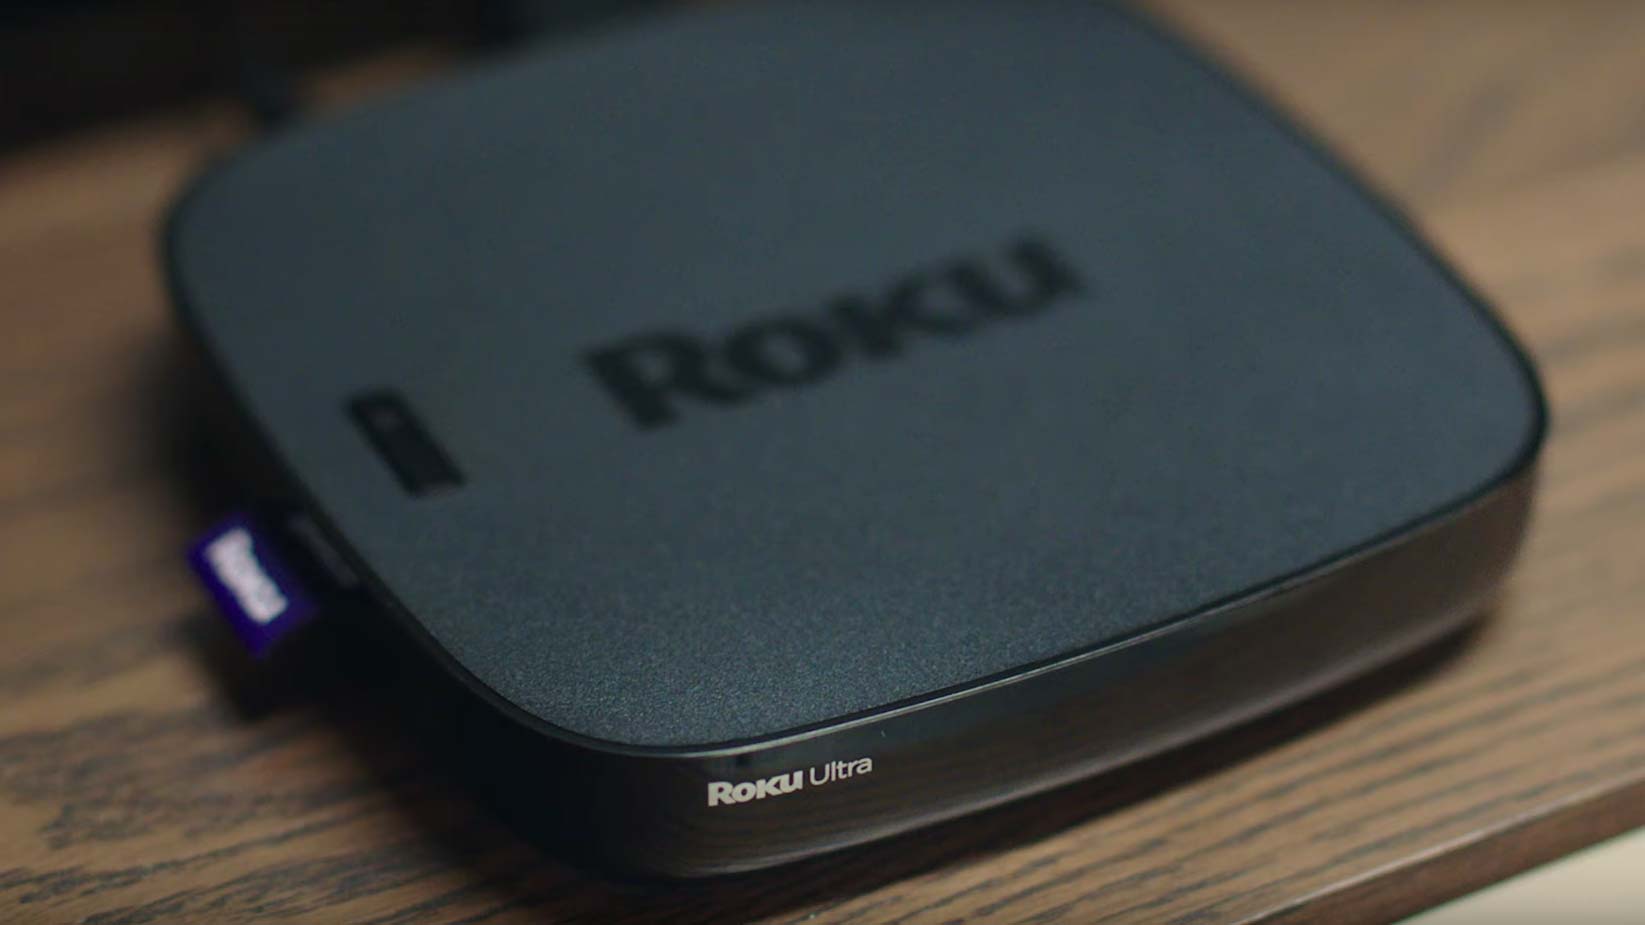 How Much is Roku? (Roku Monthly Fee)